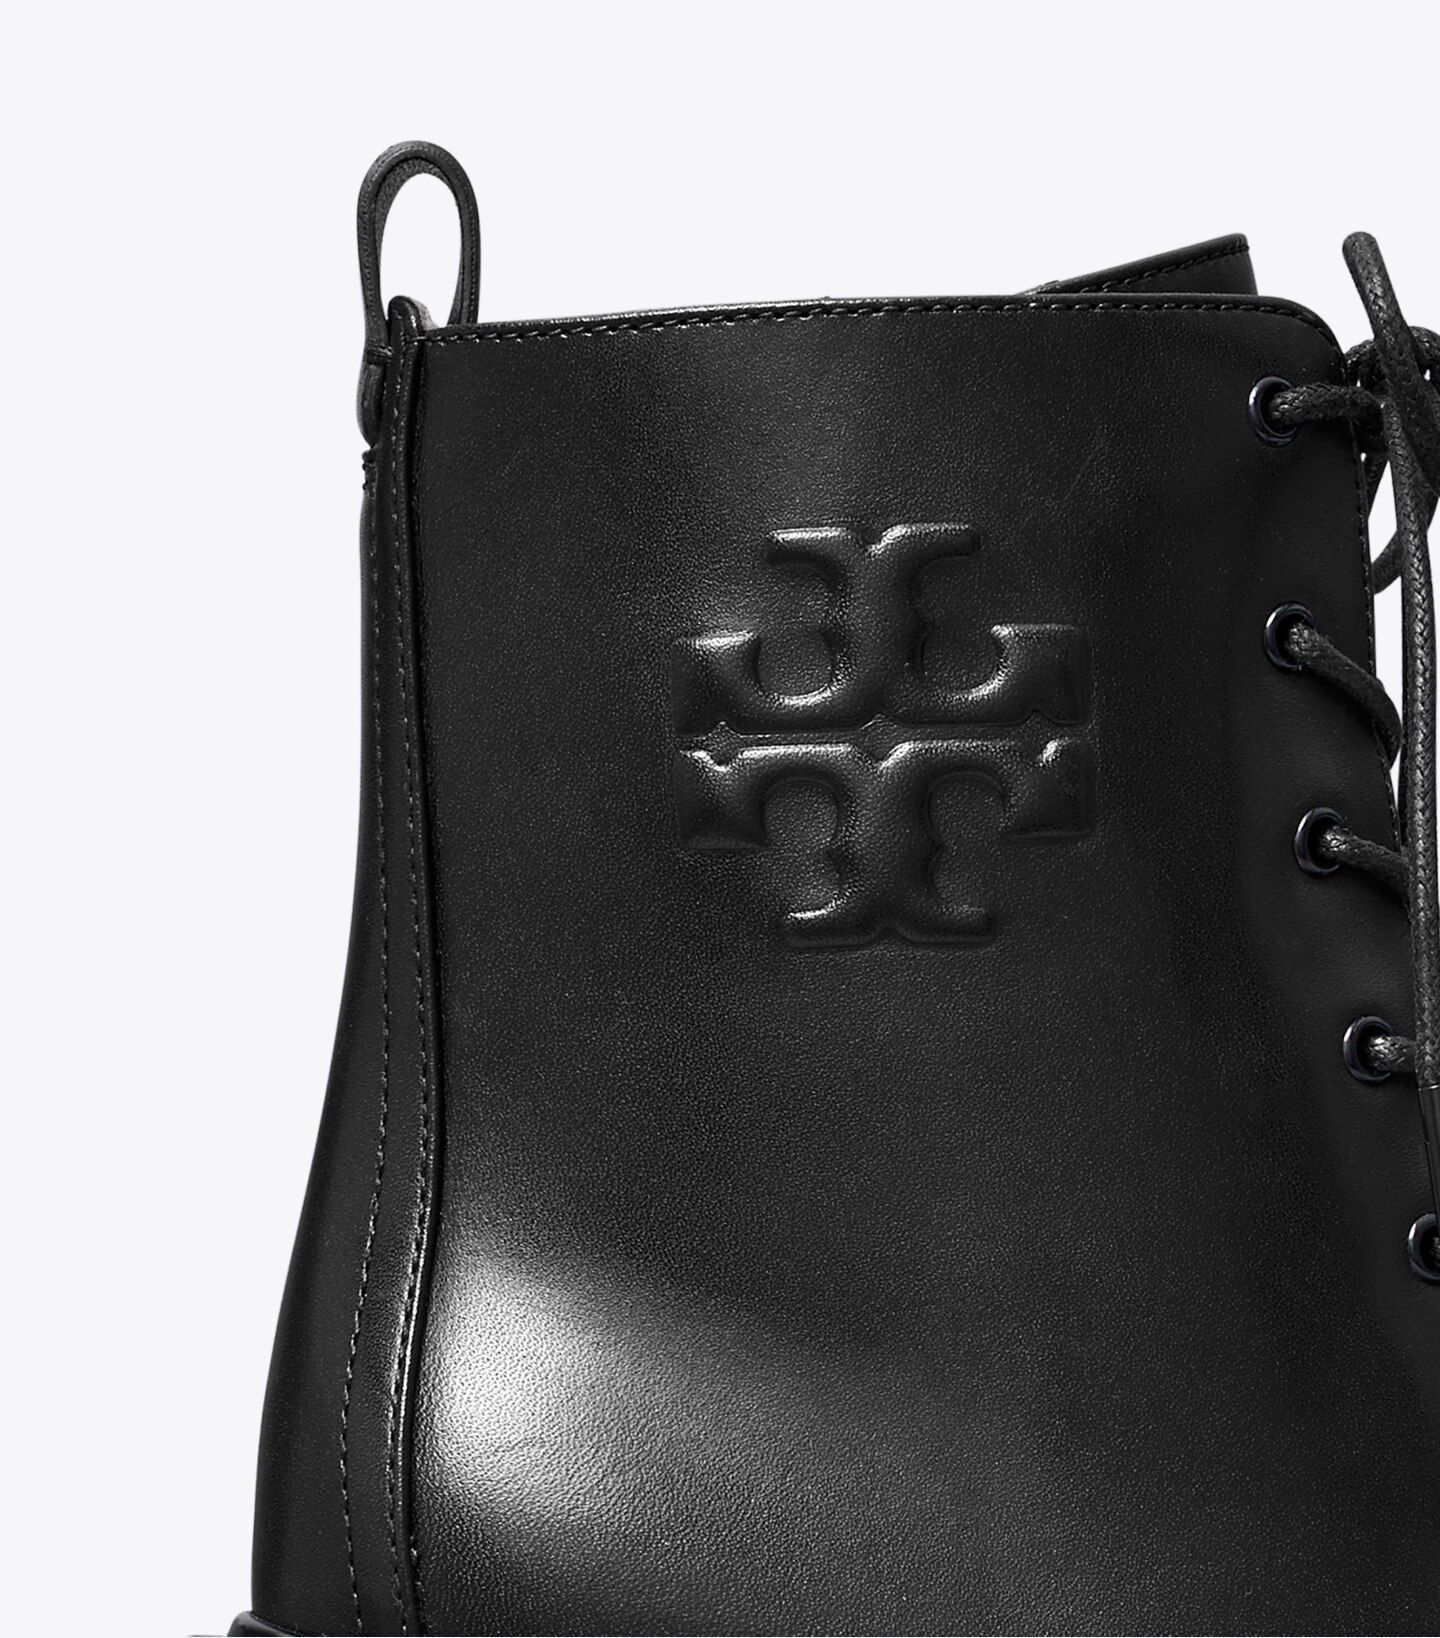 Double T Lug Boot: Women's Designer Ankle Boots | Tory Burch | Tory Burch (US)